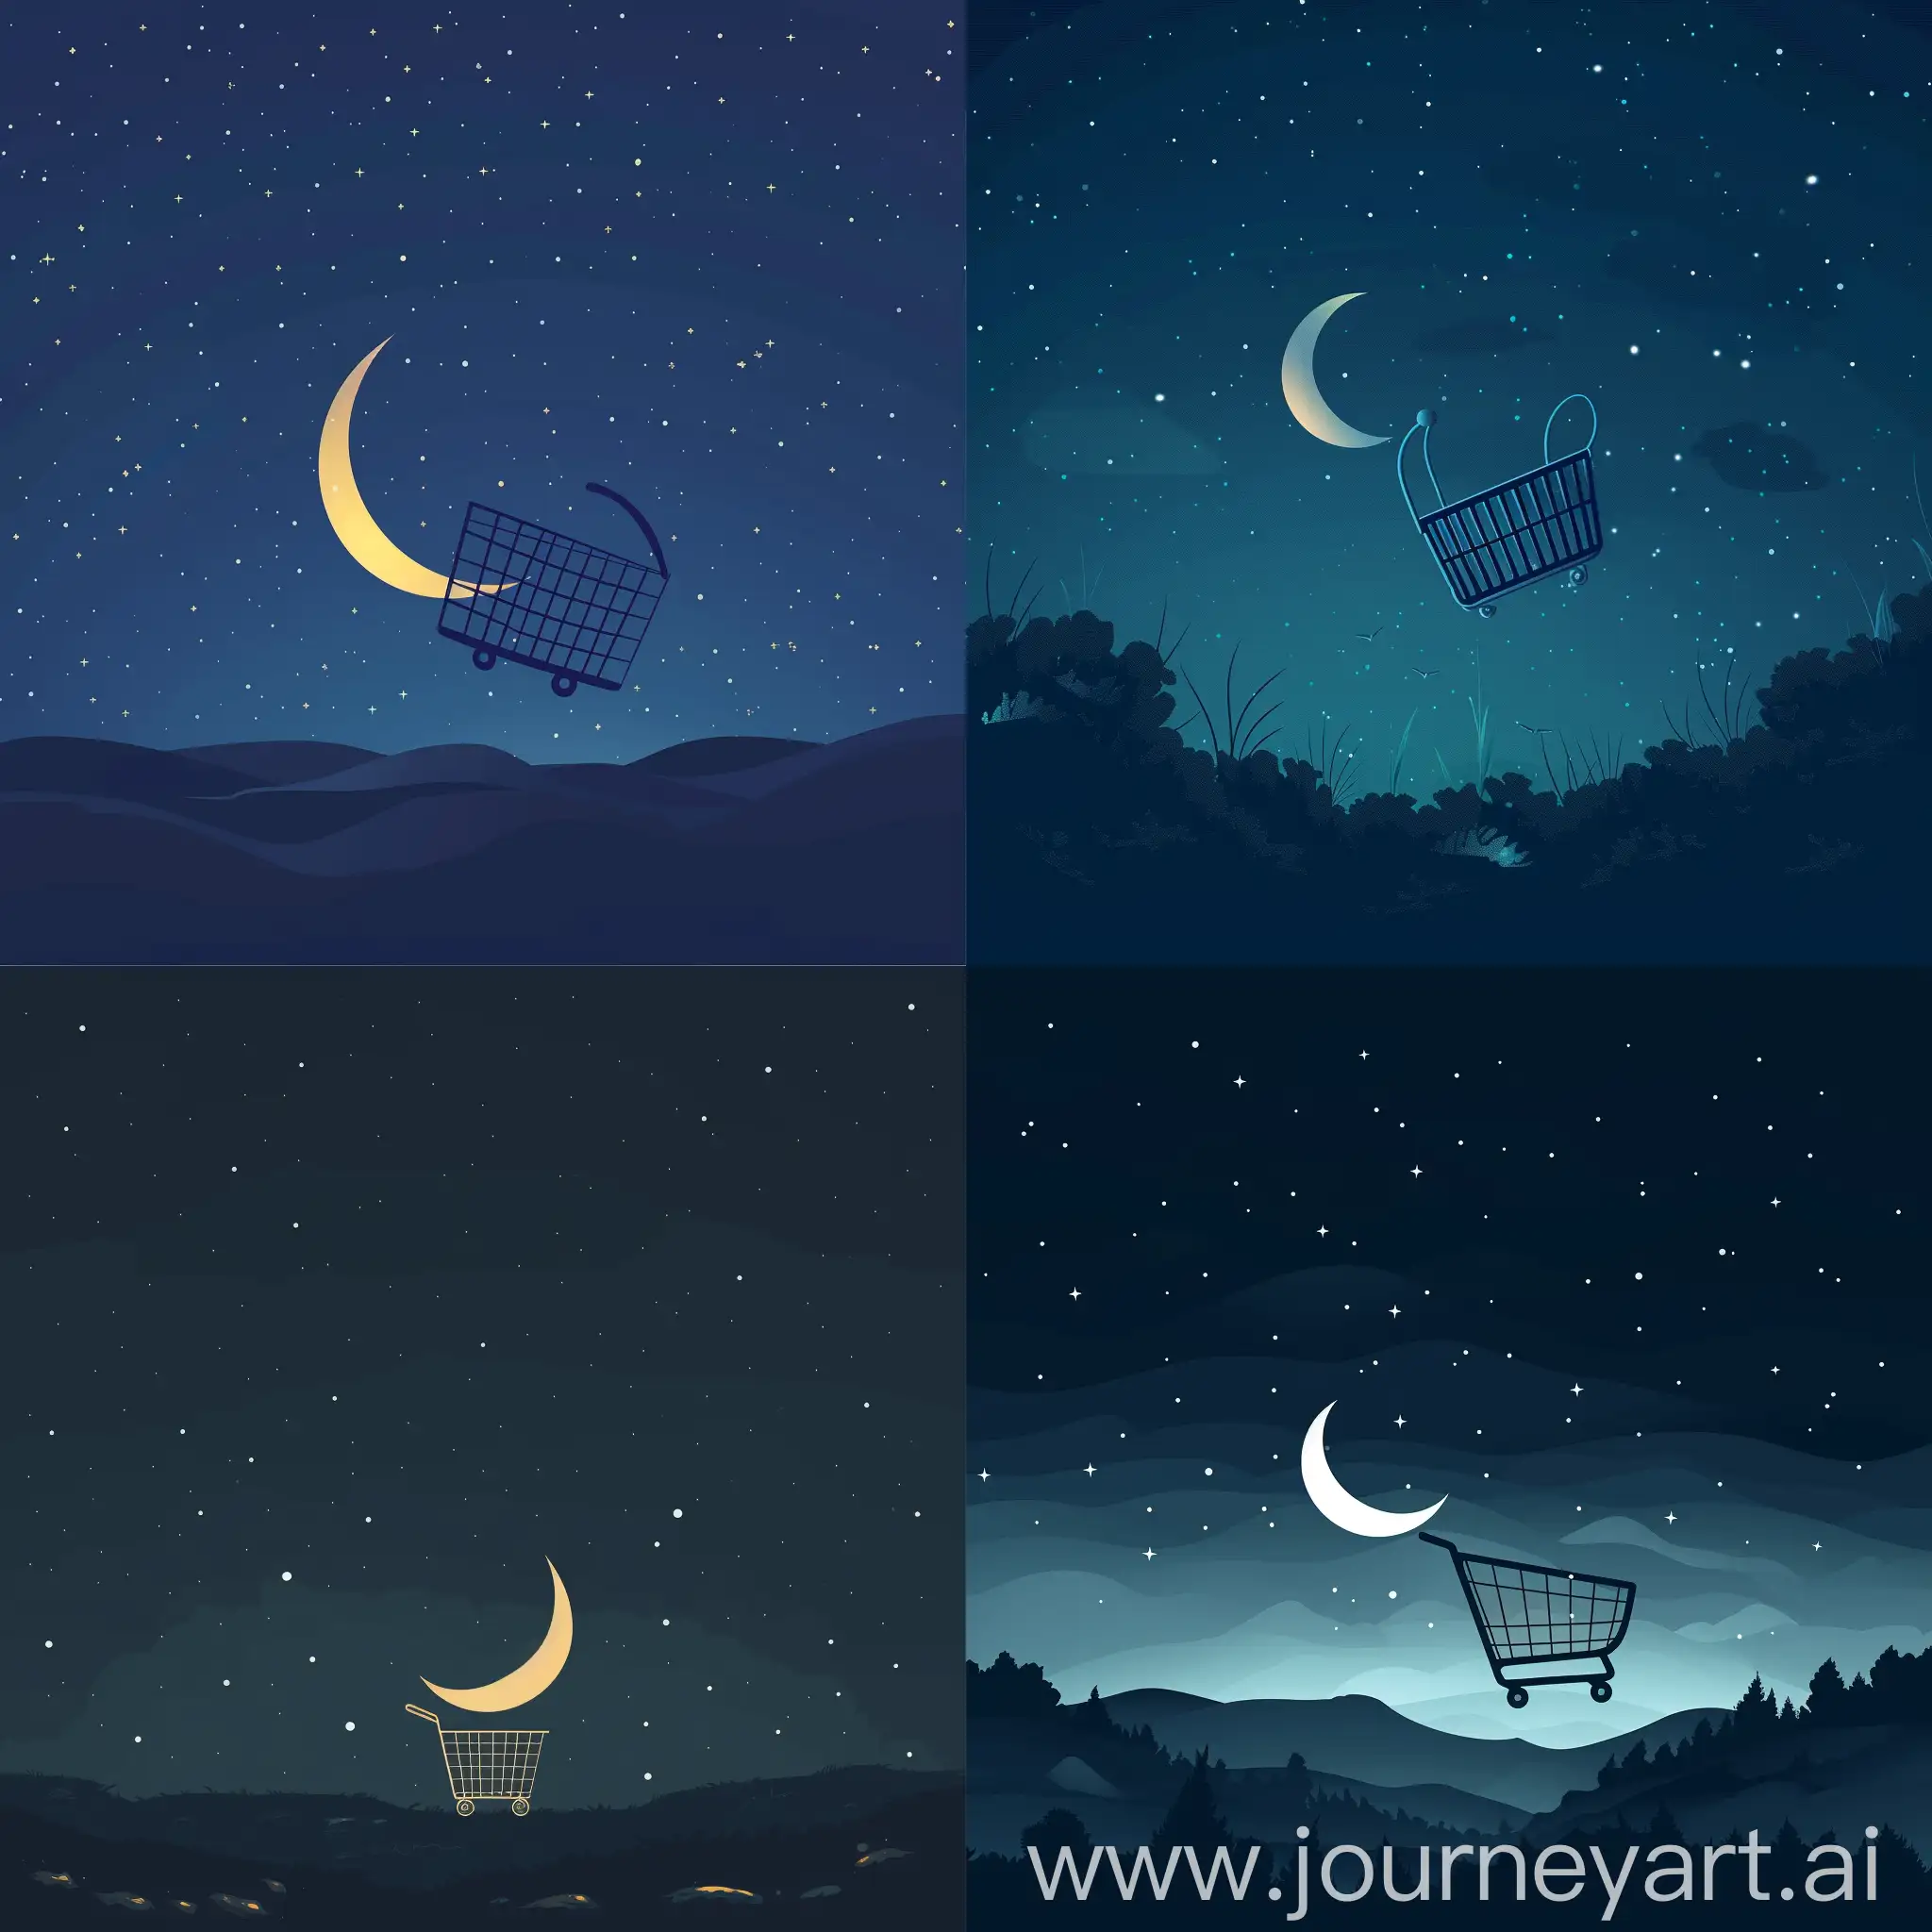 Crescent-Moon-and-Shopping-Basket-in-Night-Sky-Vector-Art